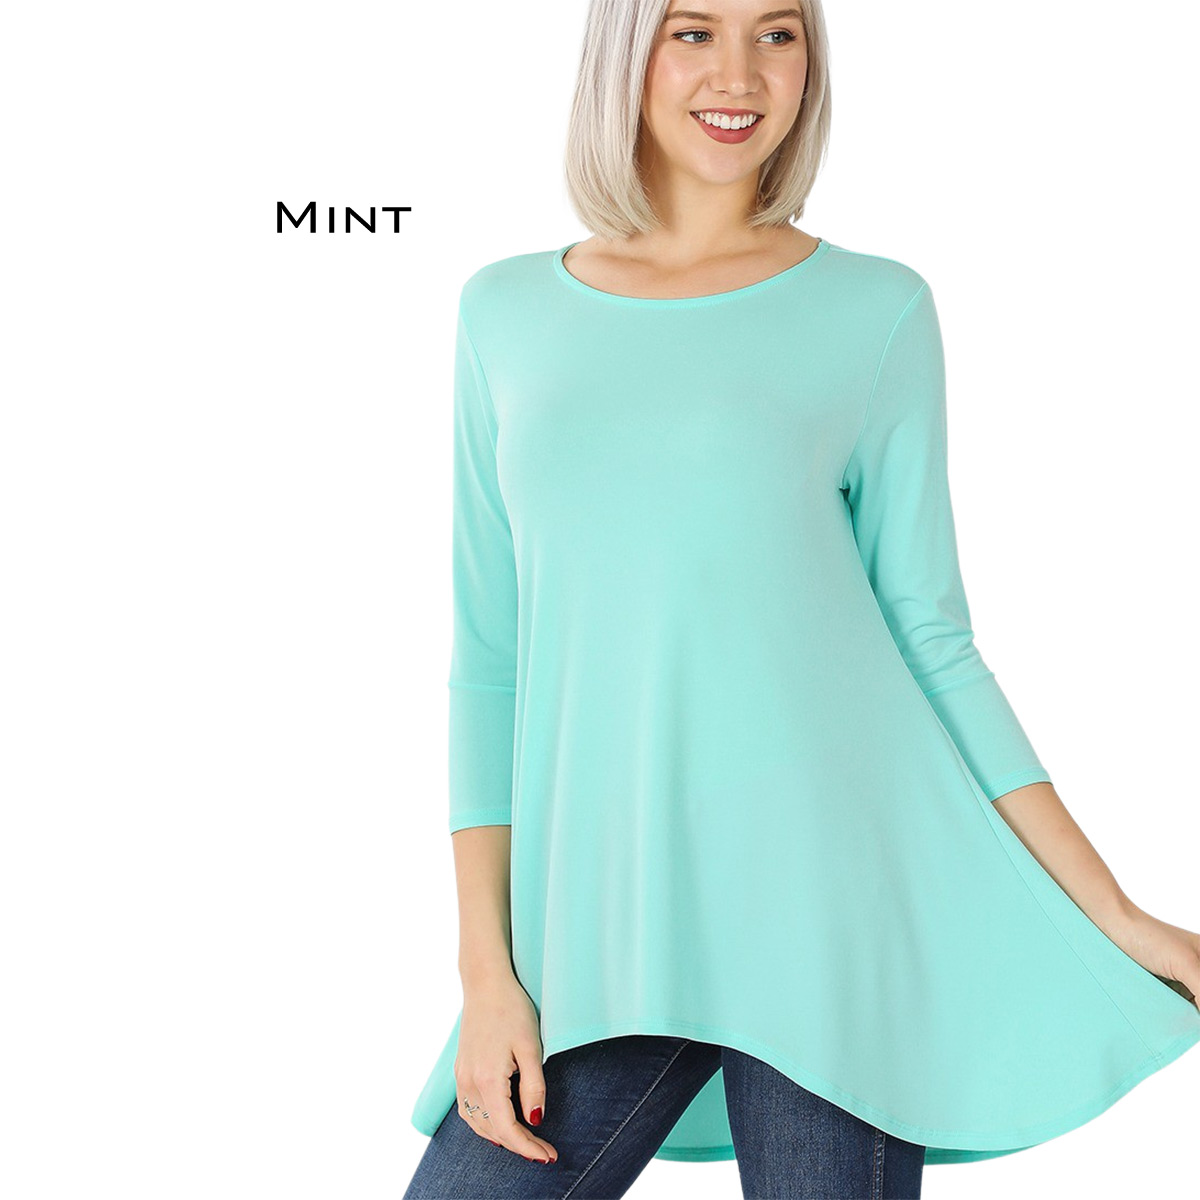 2367 - Ity High-Low 3/4 Sleeve Top MINT High-Low 3/4 Sleeve Top 2367 - X-Large